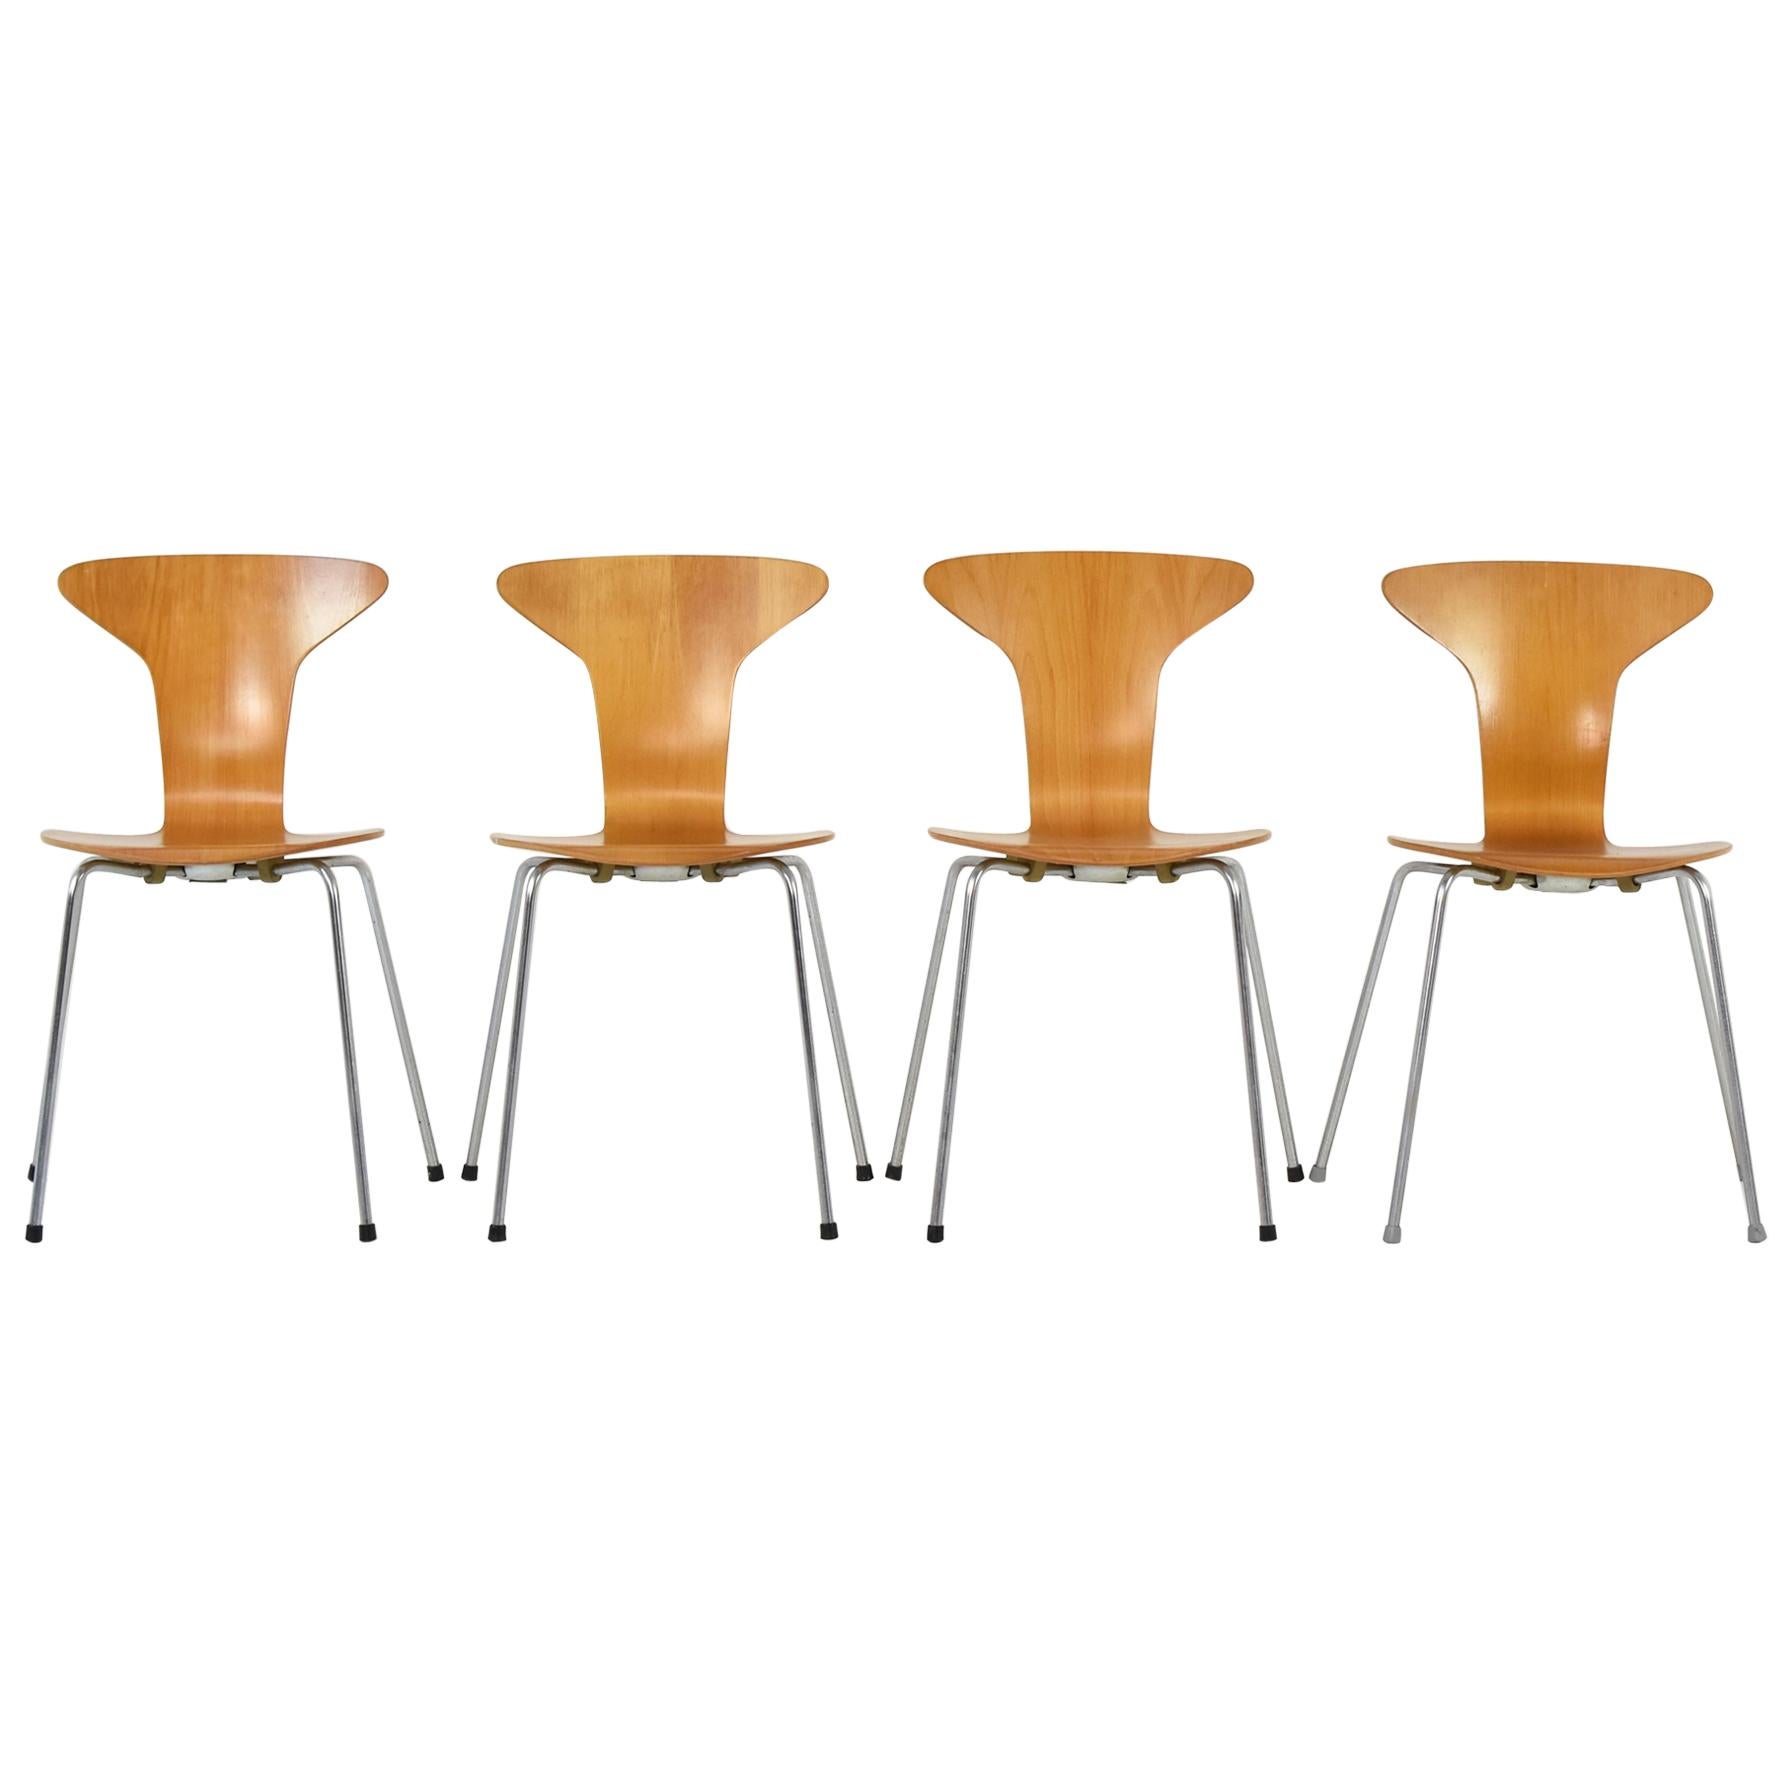 Set of 4 ‘Mosquito’ Dining Chairs by A. Jacobsen for Fritz Hansen, Denmark 1950s